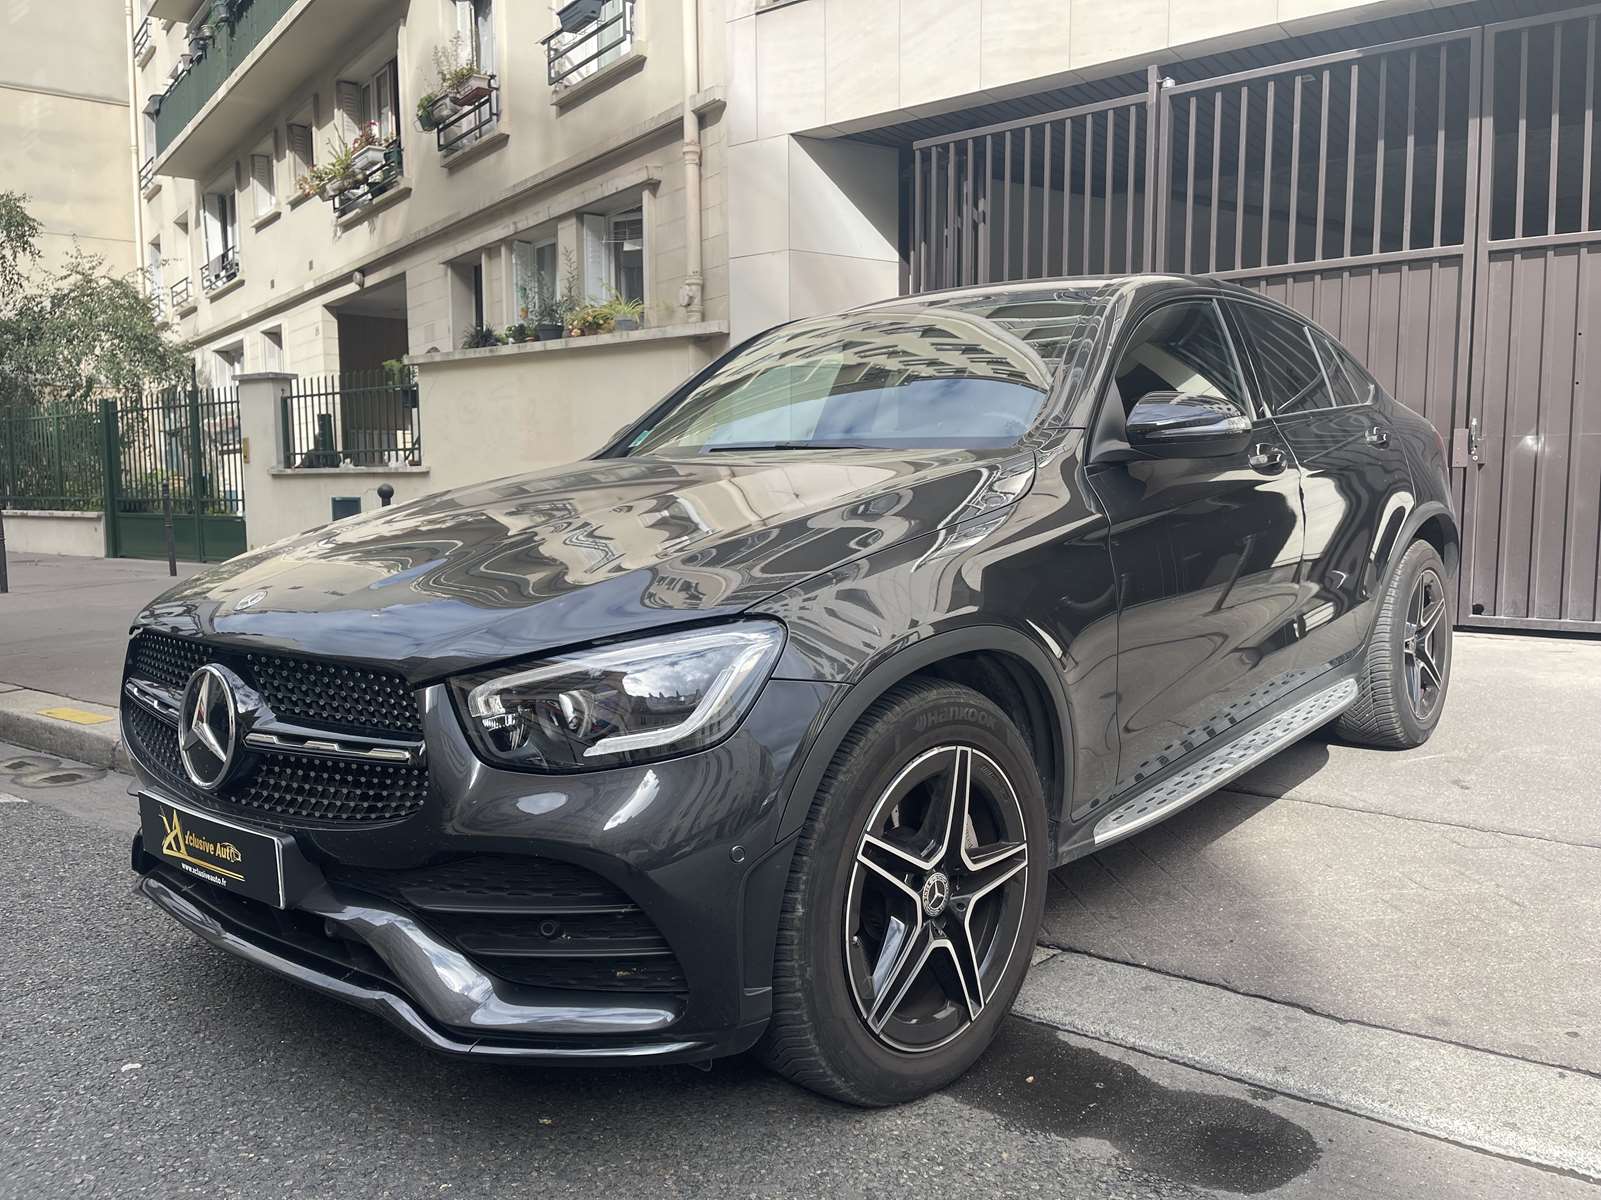 MERCEDES GLC COUPE (2) 220 D 4MATIC AMG LINE 9G-TRONIC 5